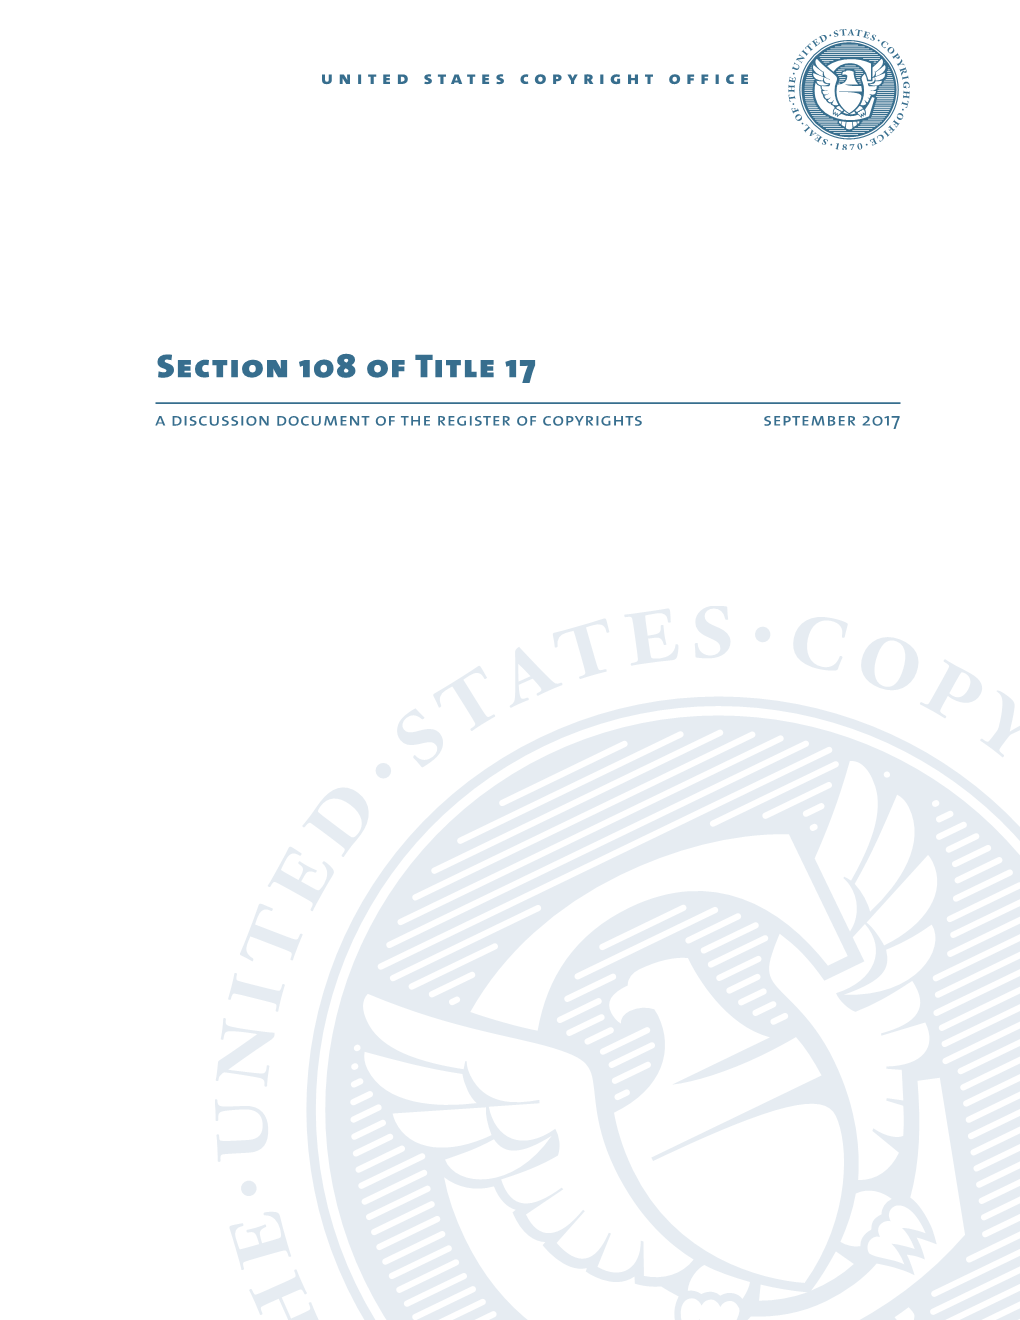 Section 108 of Title 17 – a Discussion Document Of